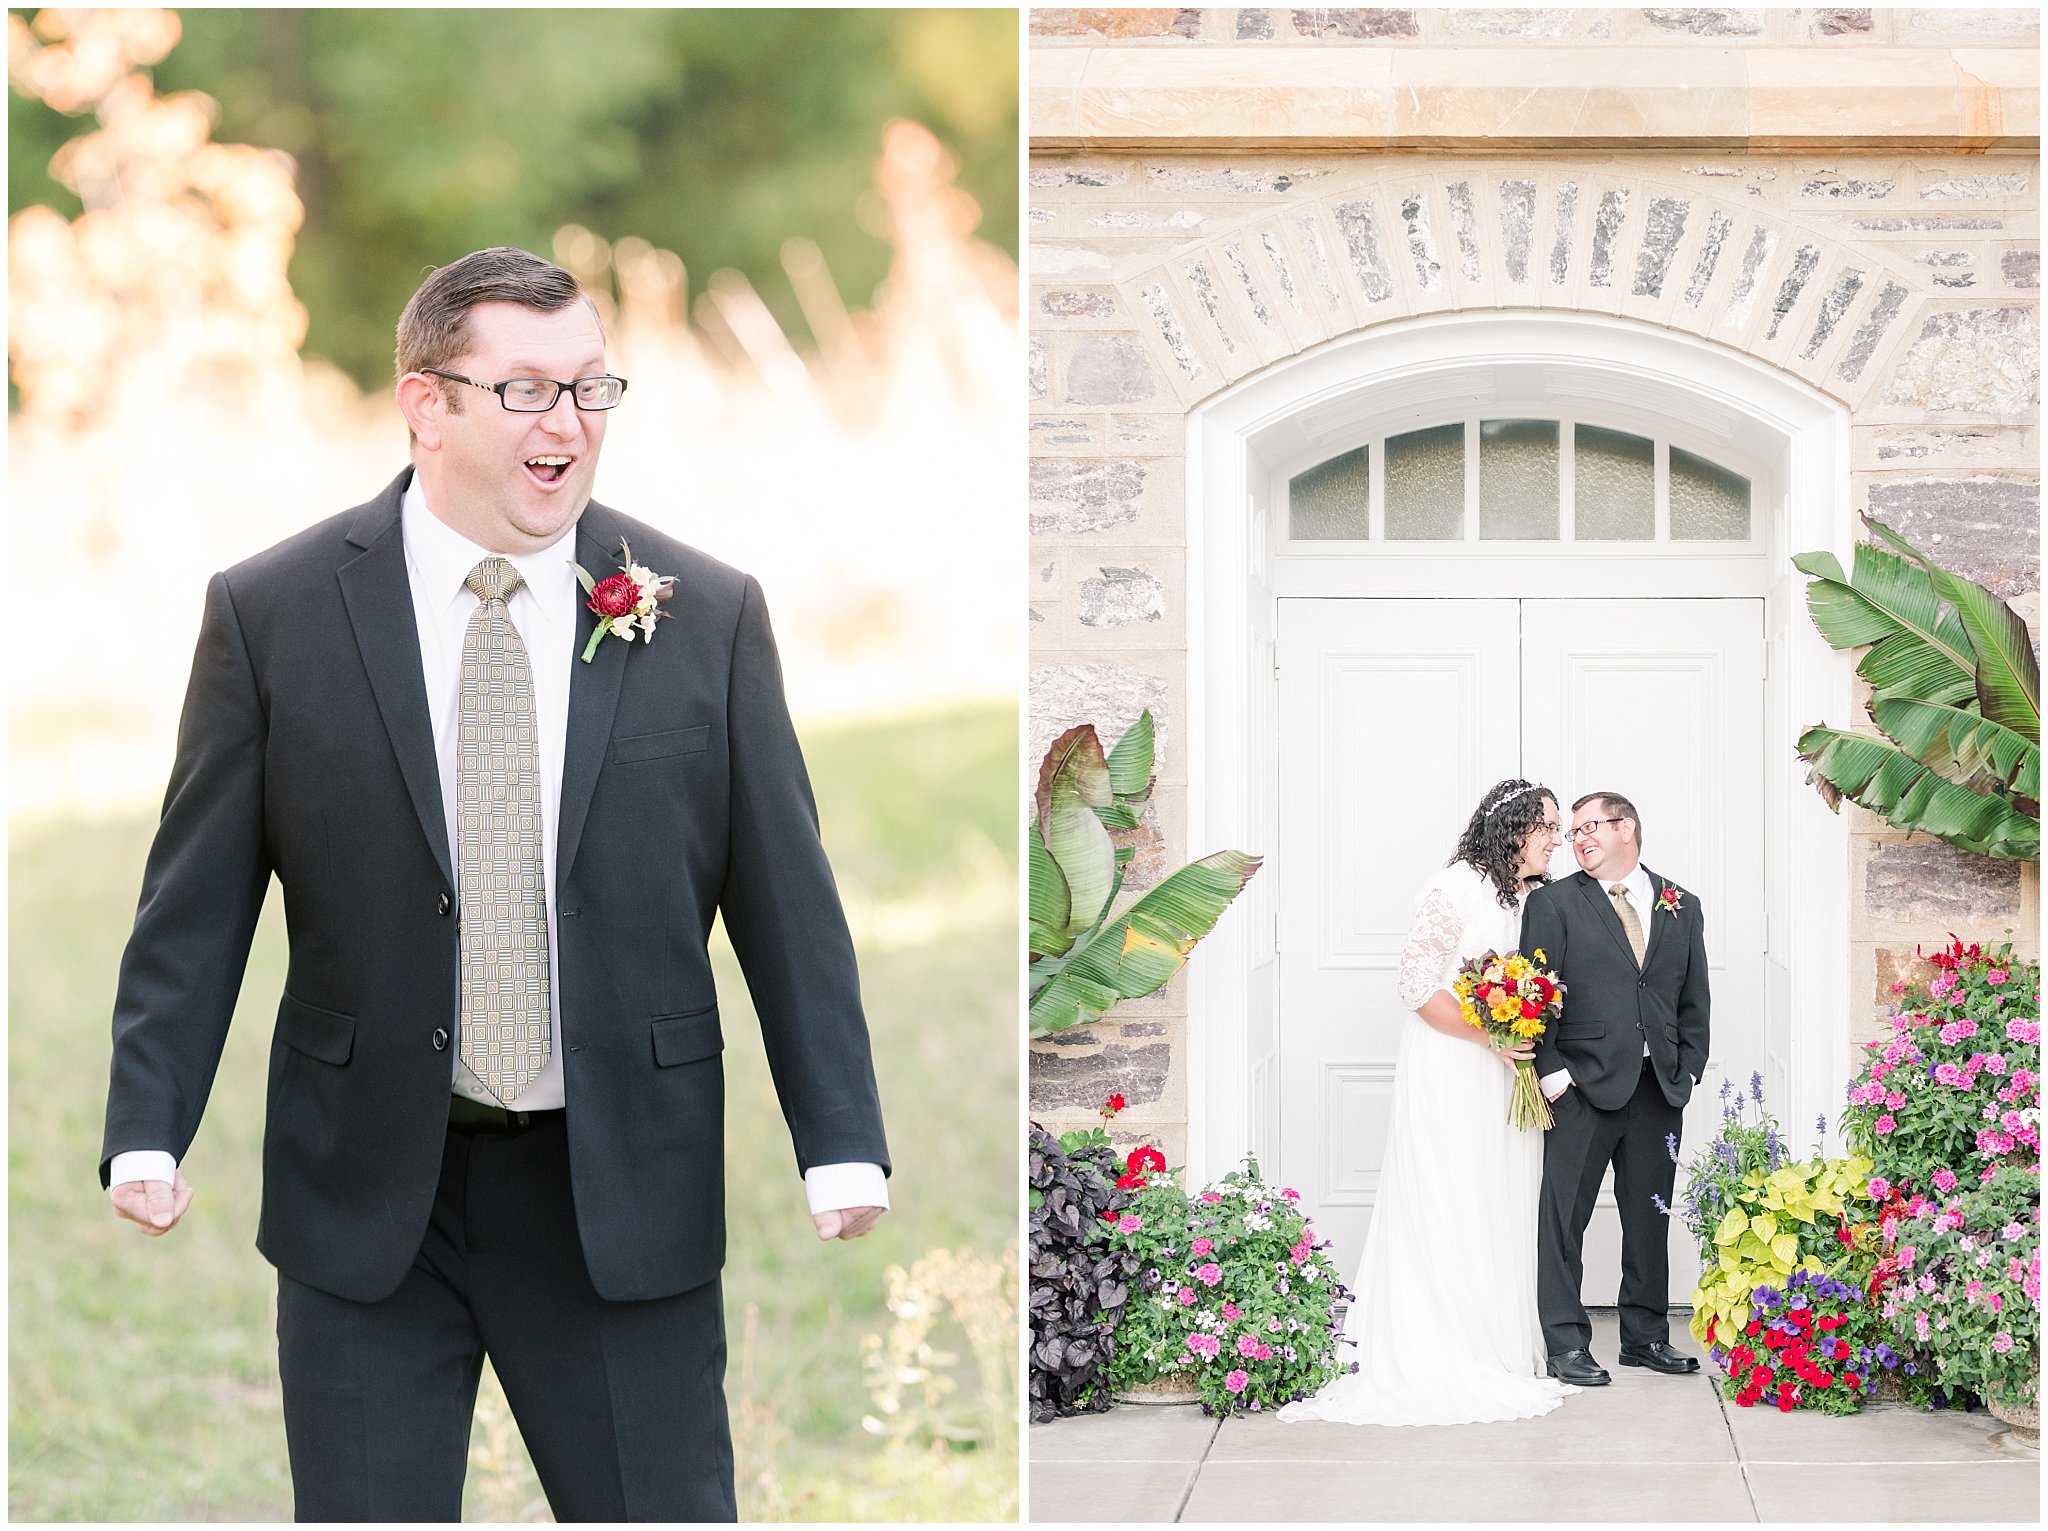 First look reaction and bride and groom at Logan Temple | Top Utah Wedding and Couples Photos 2019 | Jessie and Dallin Photography